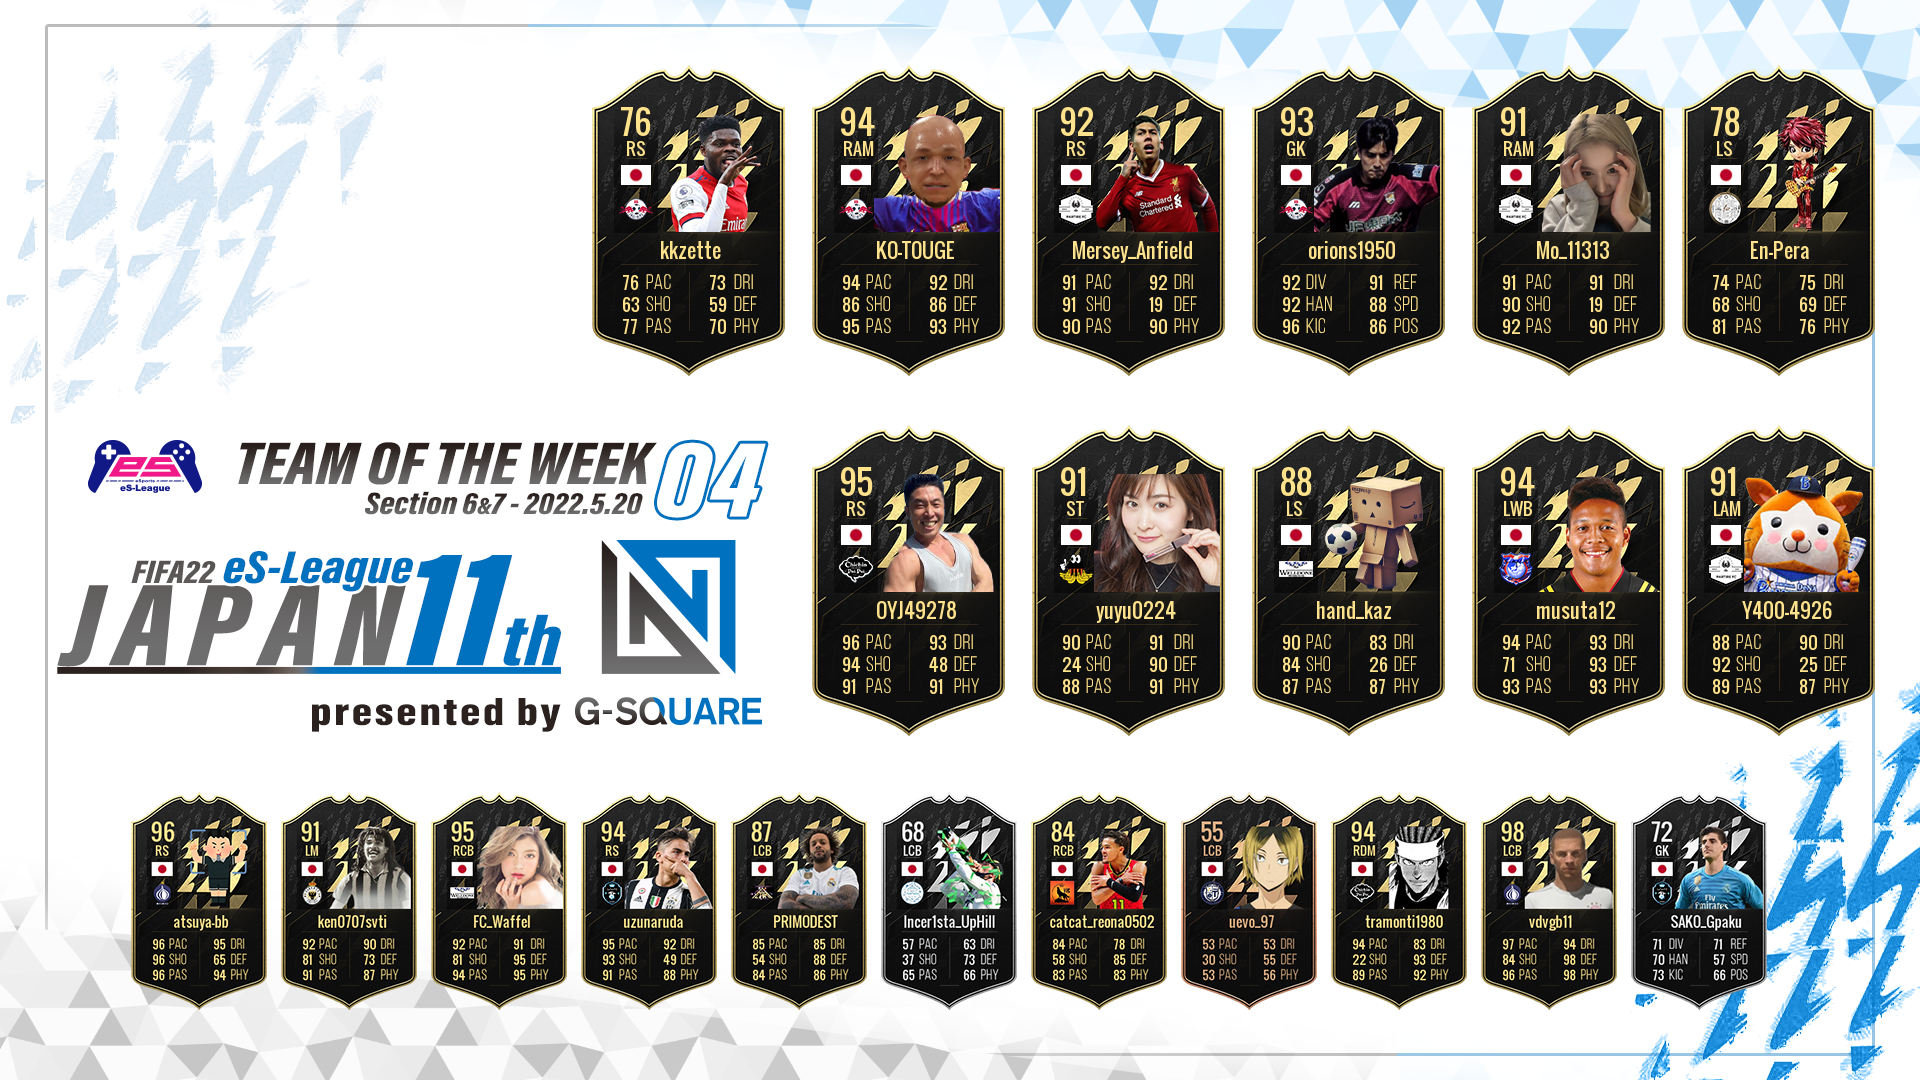 【TOTW04】FIFA22 eS-League JAPAN 11th presented by G-SQUARE